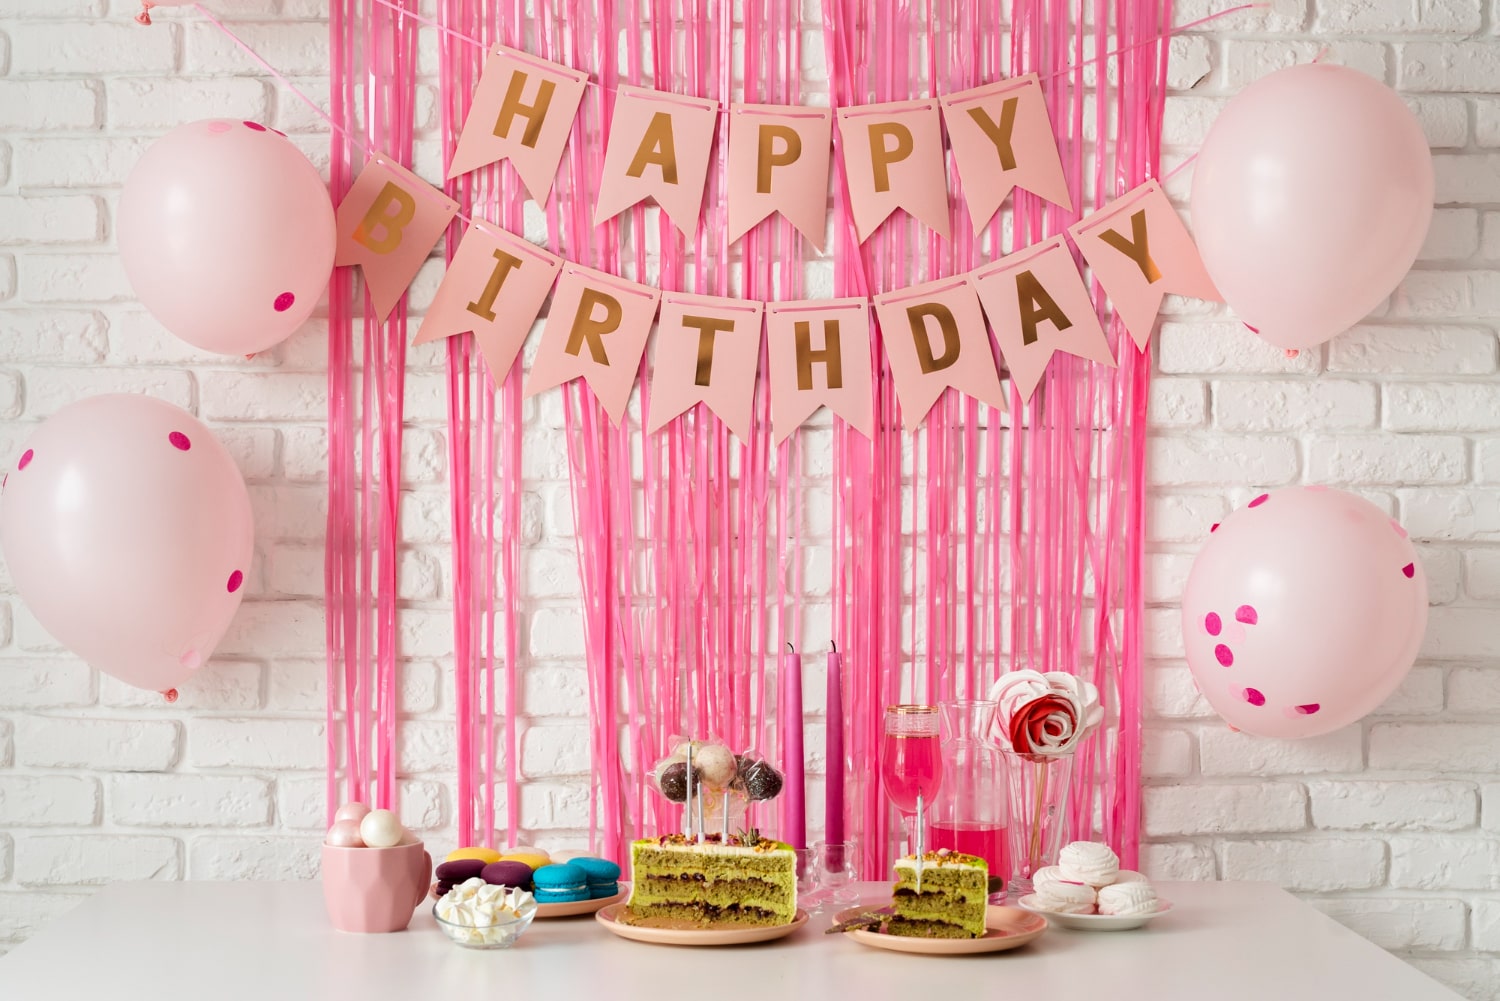 -Personalized Birthday Banner: Customized home decor for special celebrations